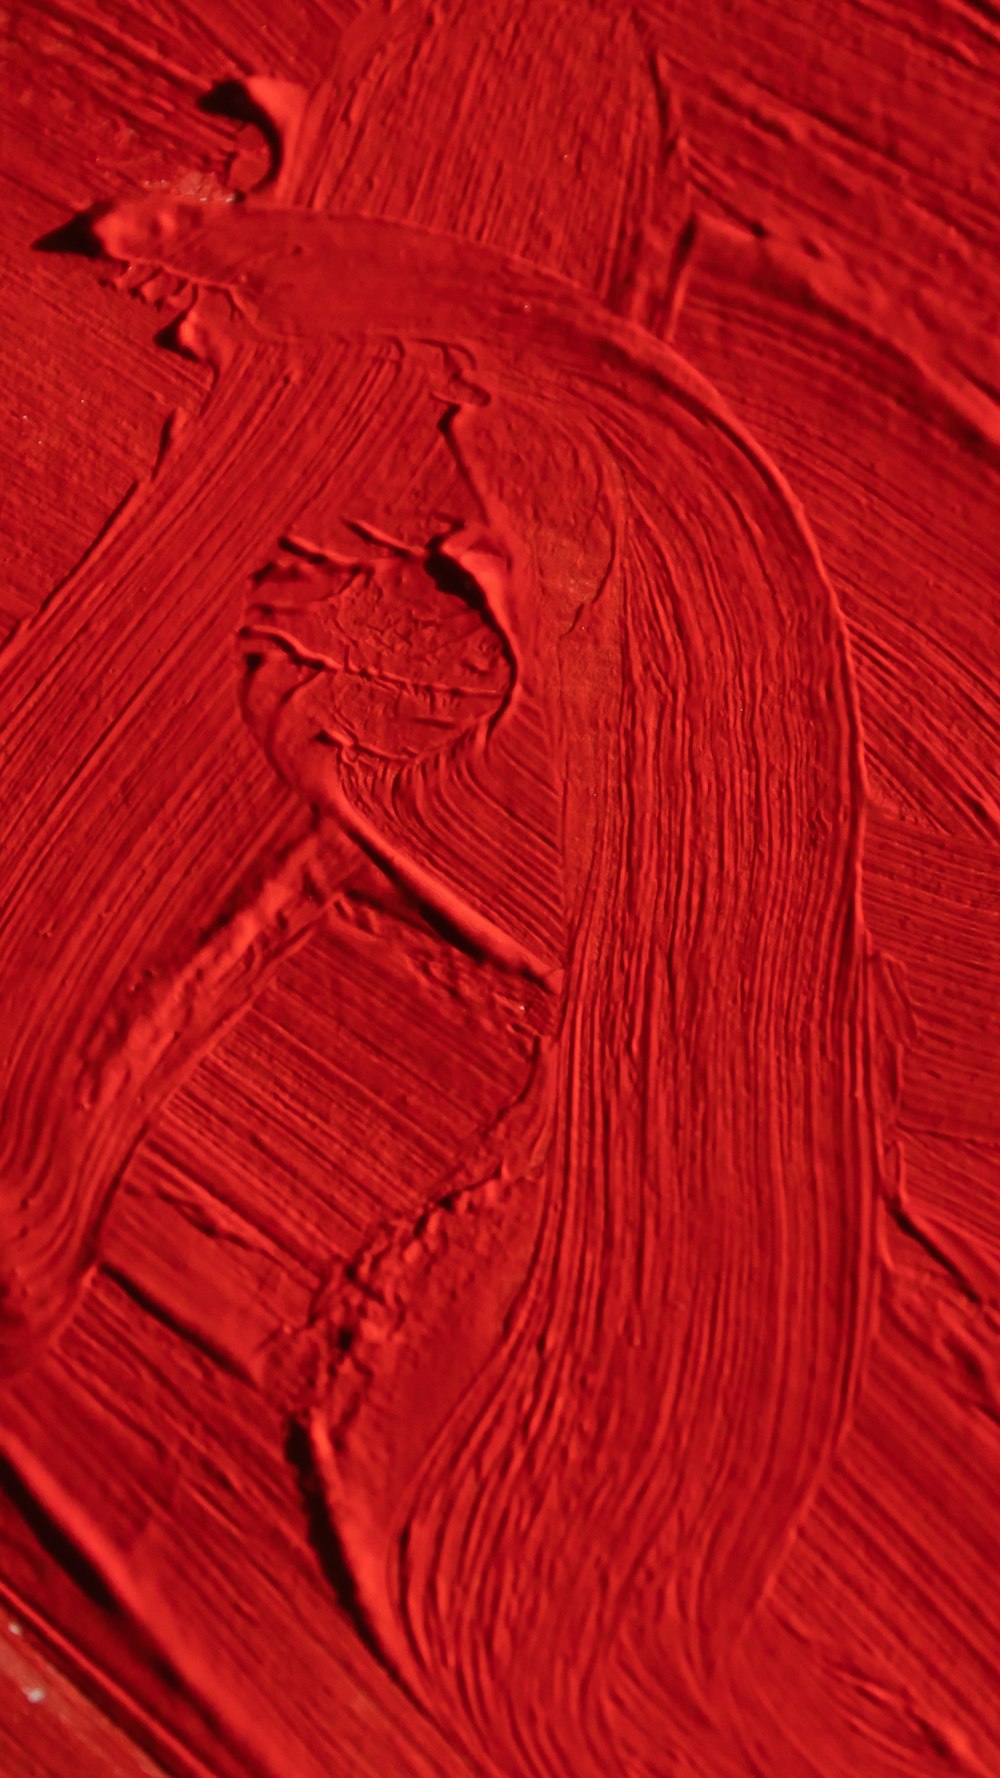 a close up view of a red paint